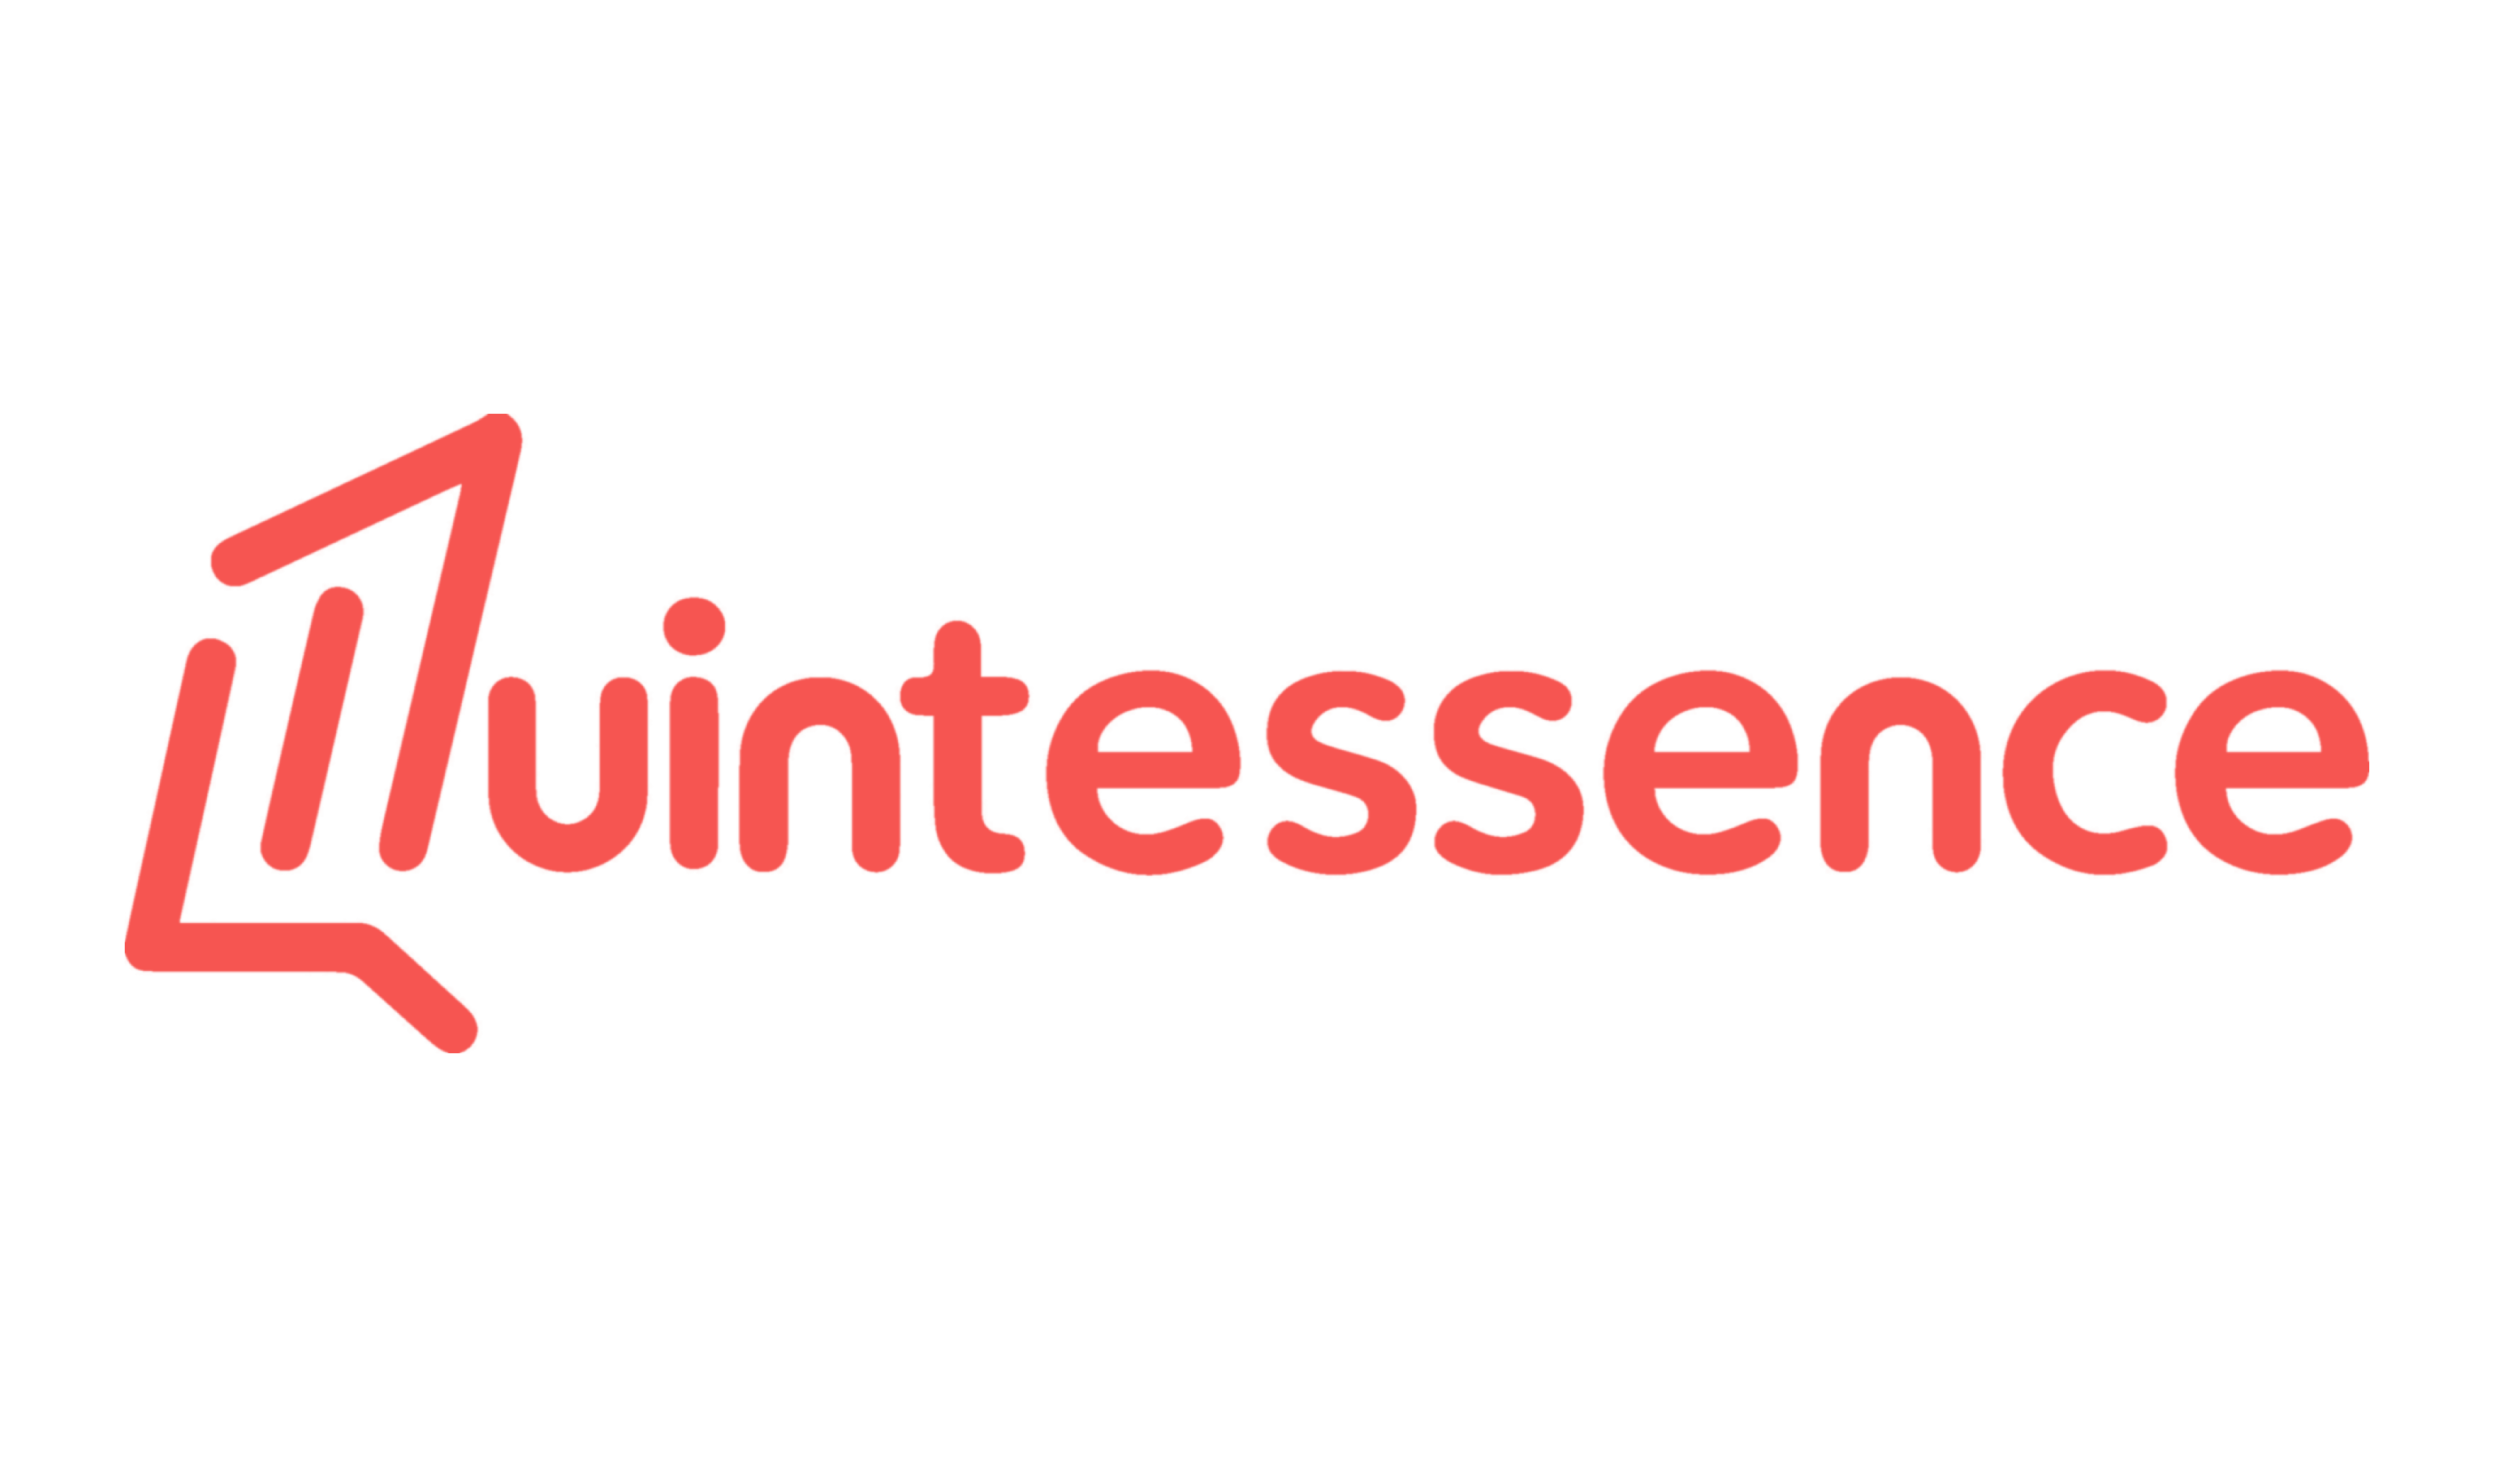 Firstsource Acquires Quintessence to Bolster AI-Powered Revenue Cycle Management Solutions